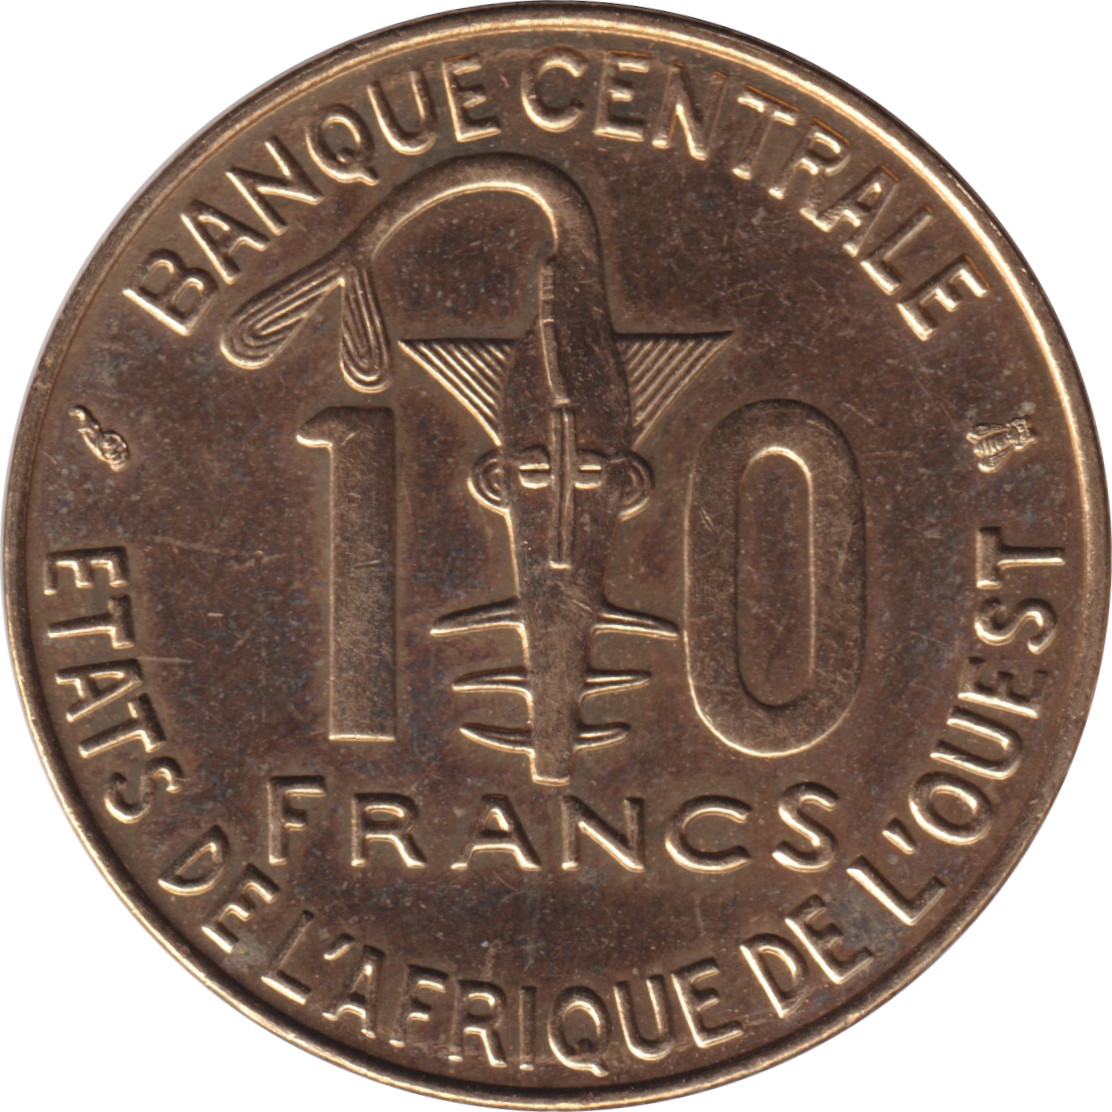 10 francs - Water well